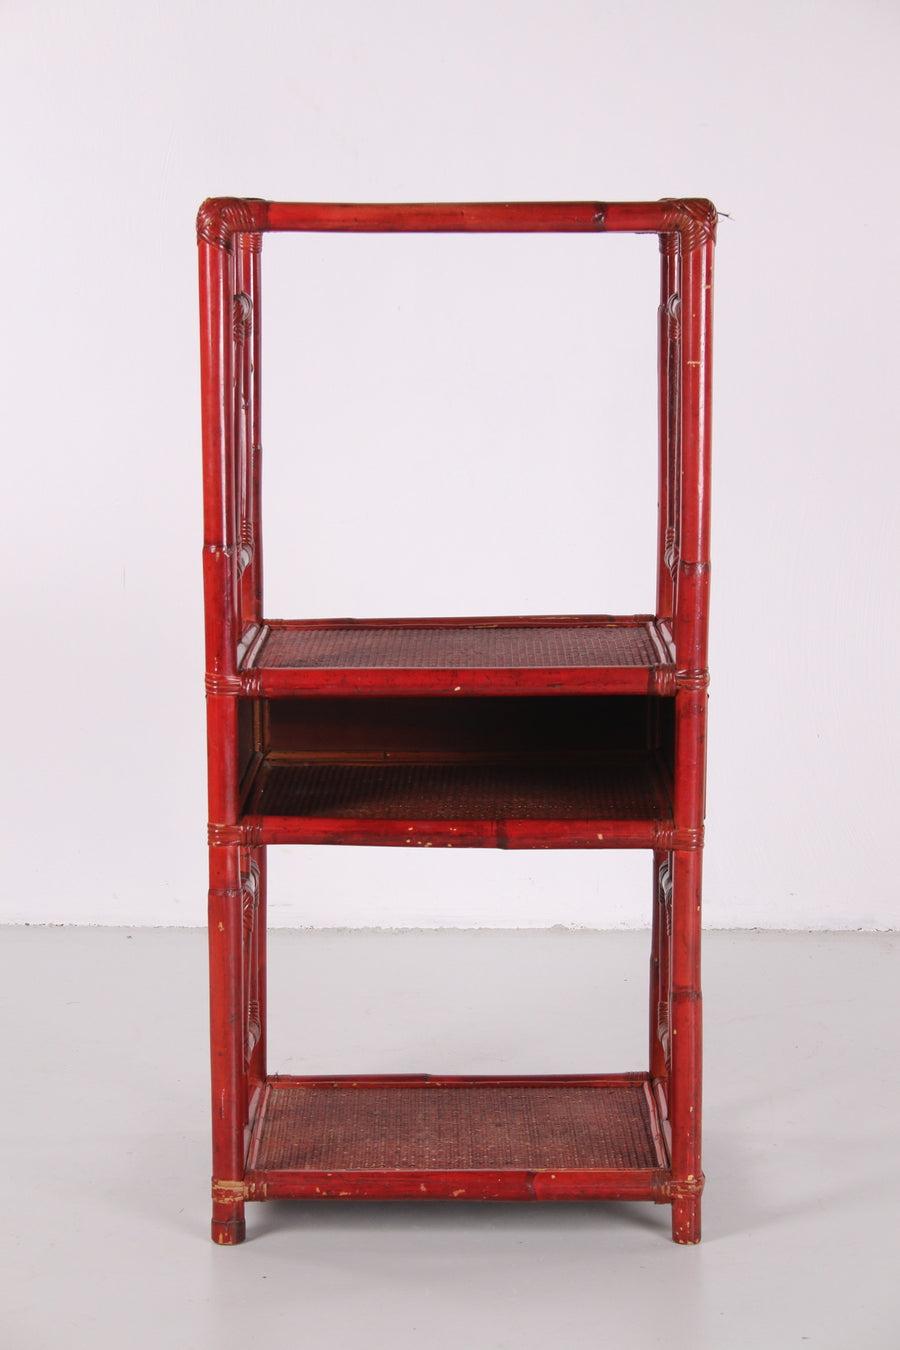 This is a very nice bamboo wall rack or cream divader, the color is old red.

This rack comes from China, probably made around 1900.

Can be used for various things to place books or to make a small partition somewhere.

It has 4 plateaus and is